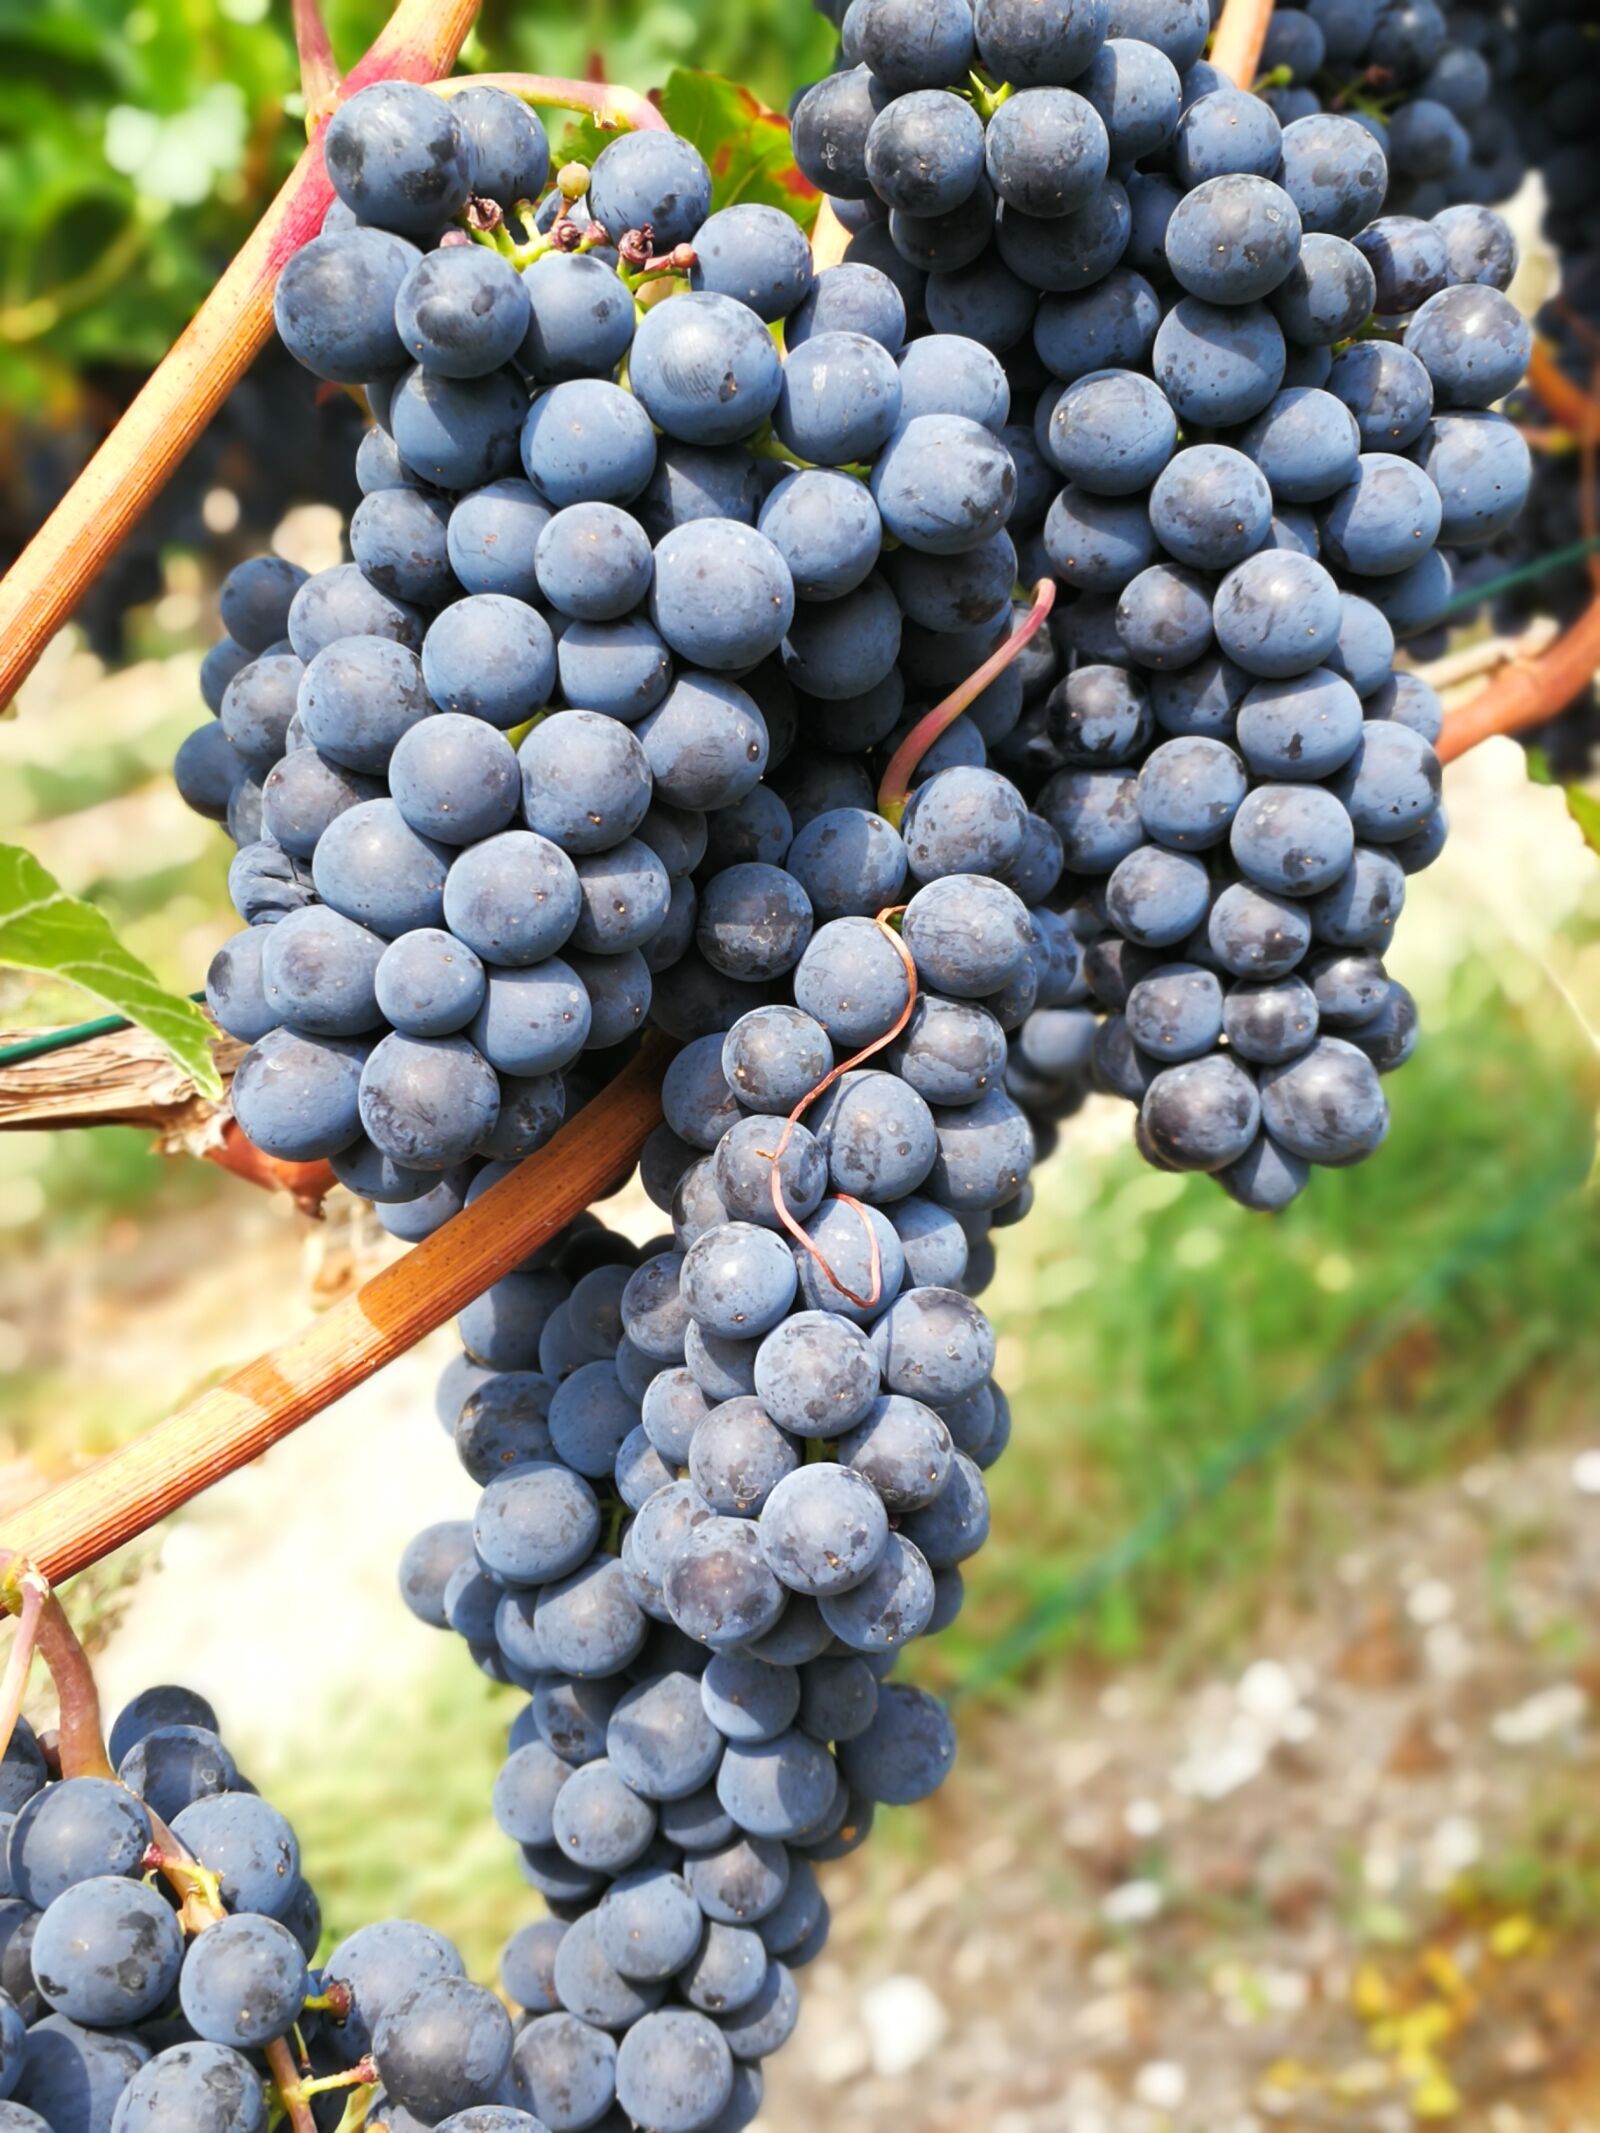 HUAWEI Mate 9 sample photo. Wei, grapes, red wine photography